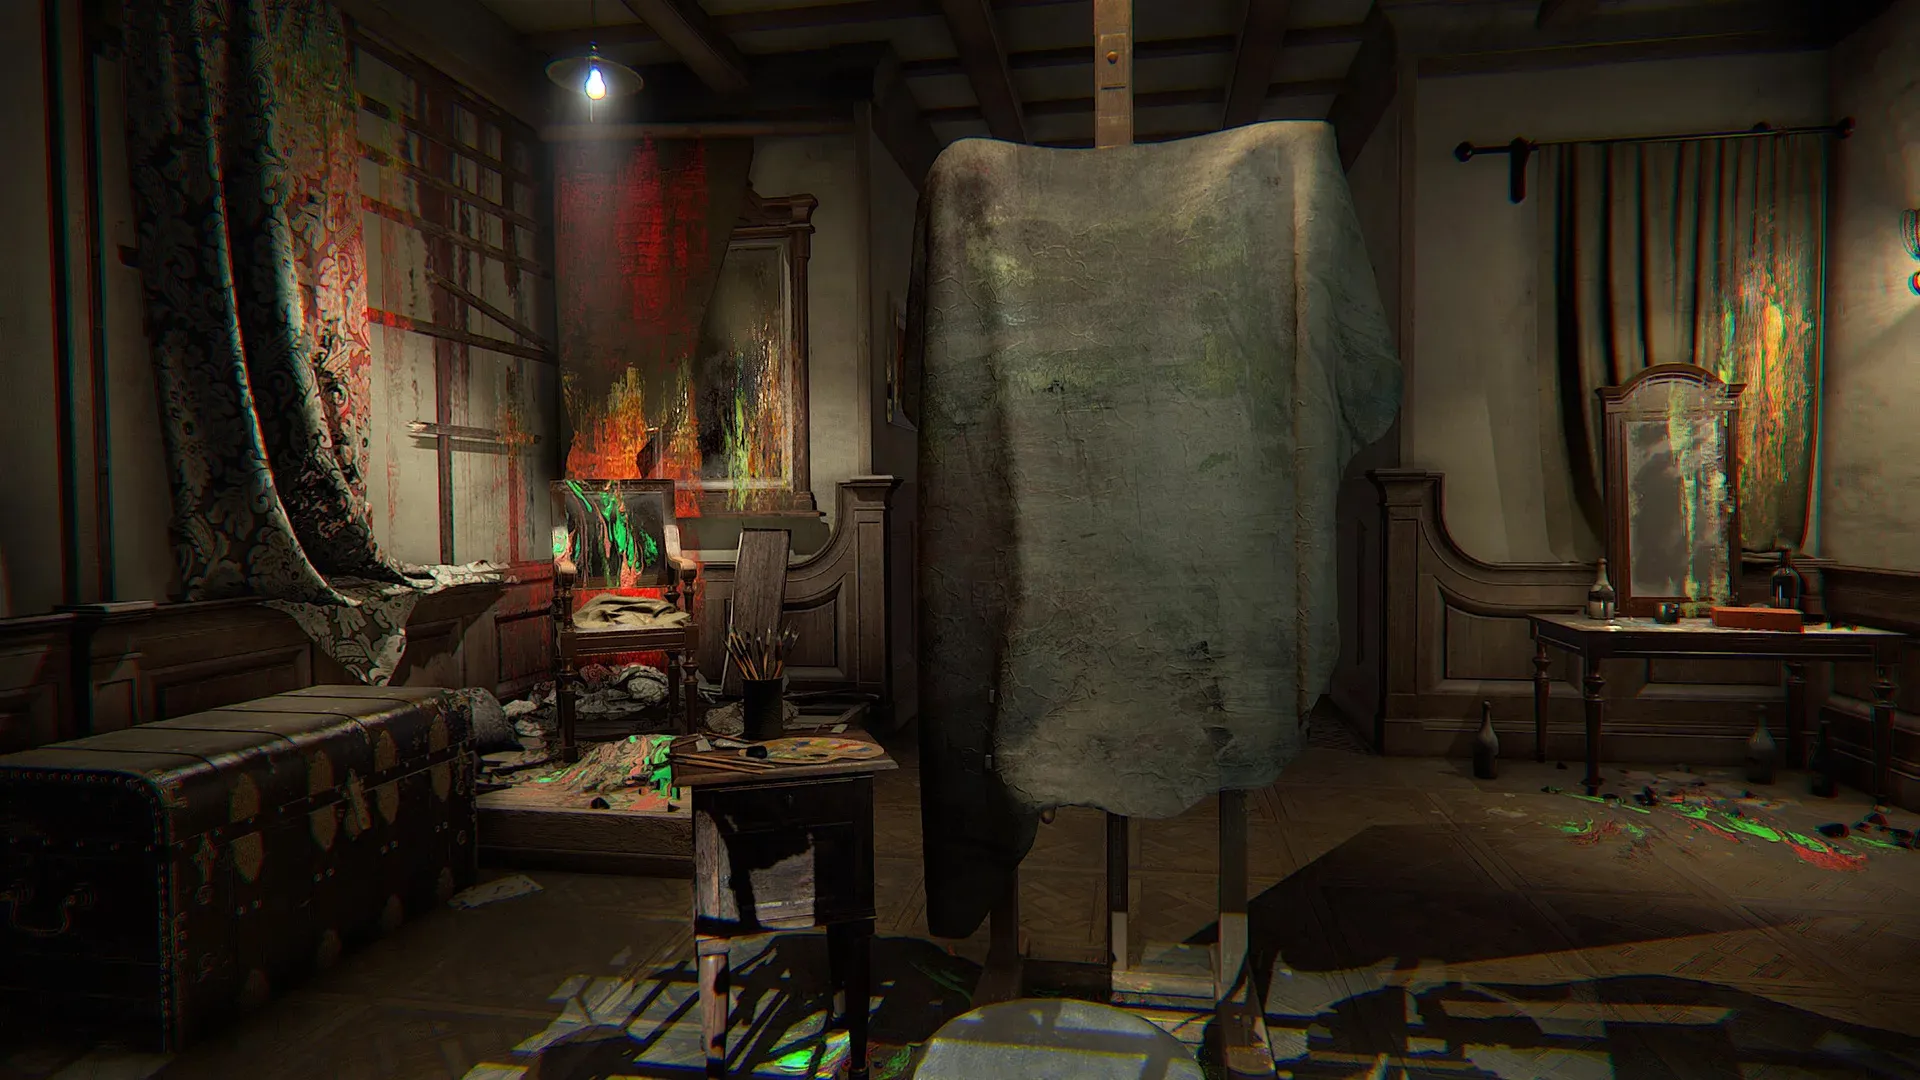 Layers of Fear PS4